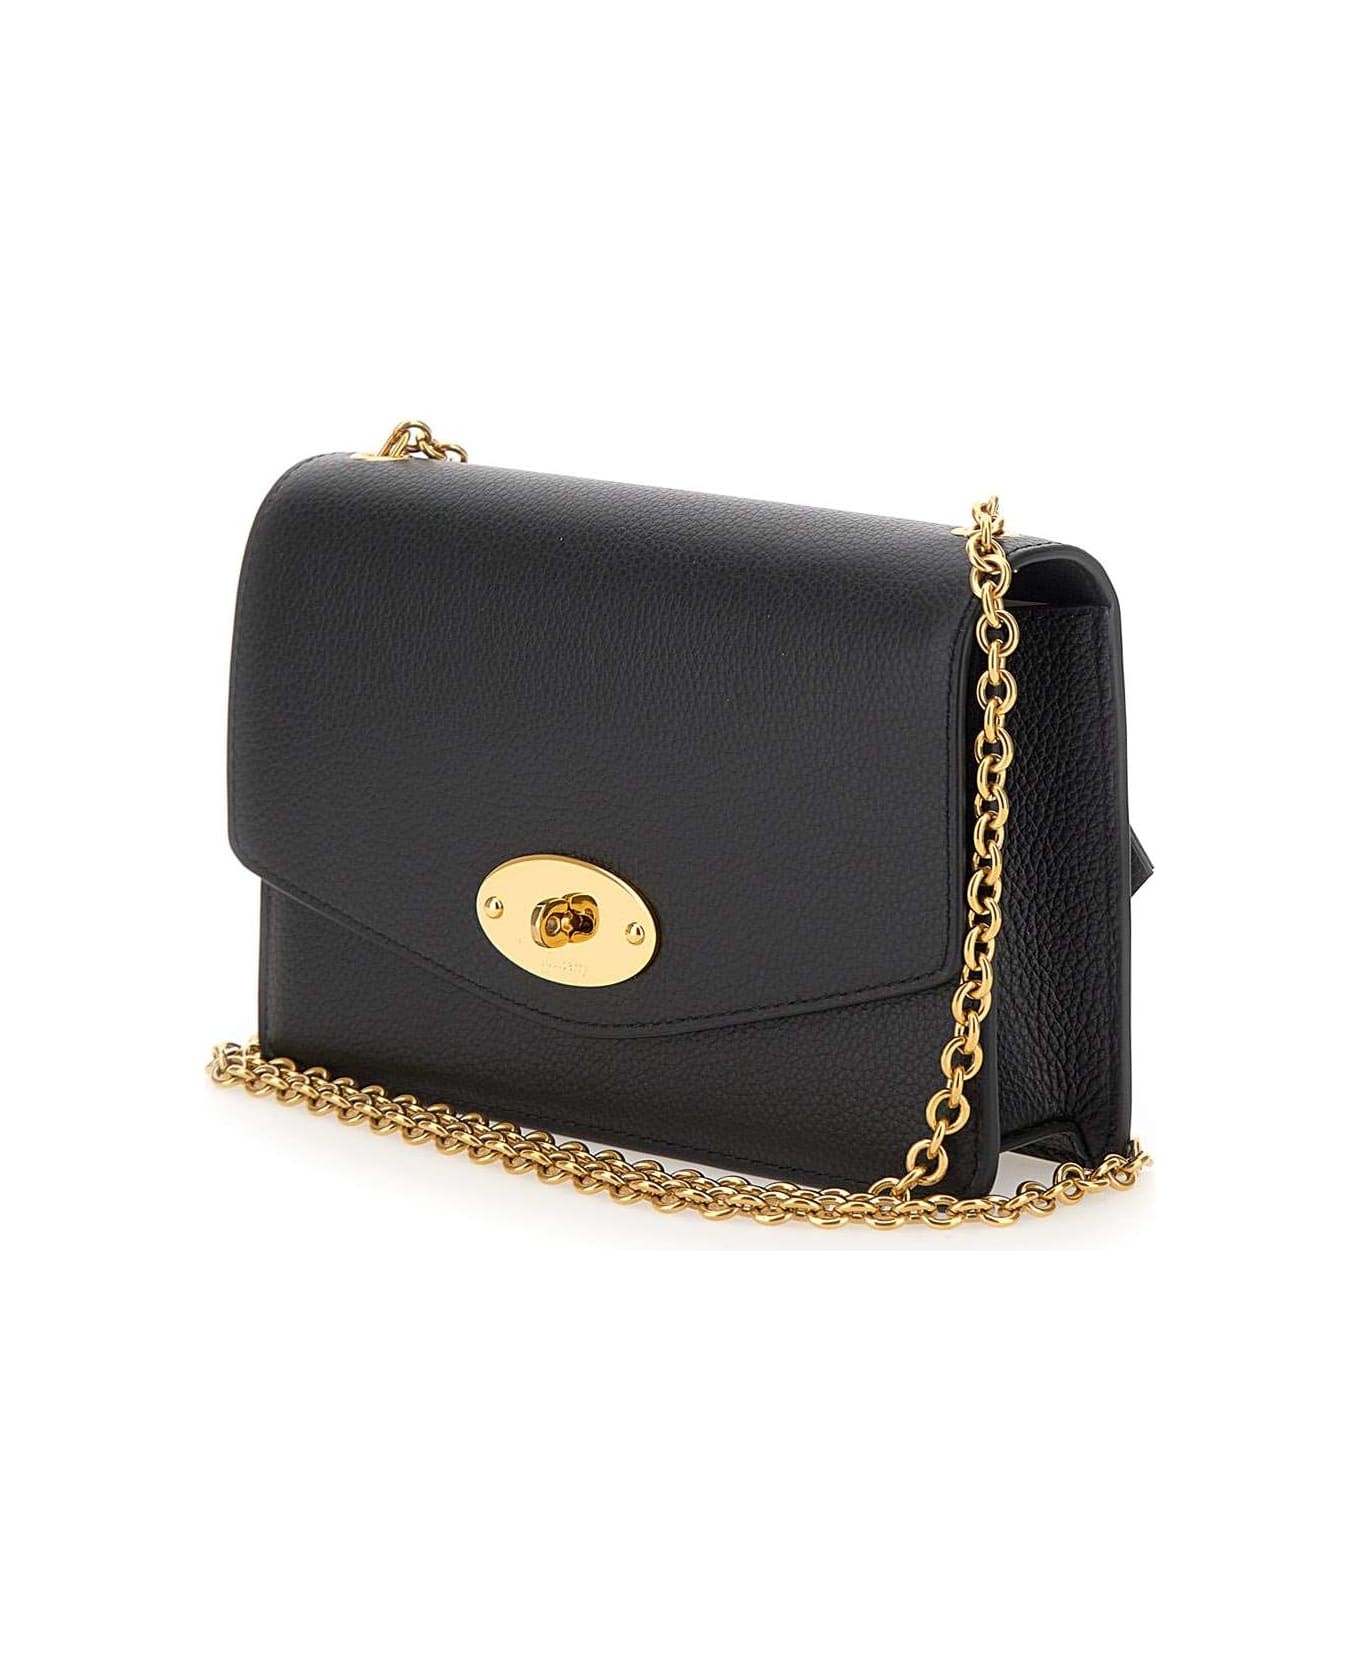 Mulberry 'small Darley' Leather Bag - Black